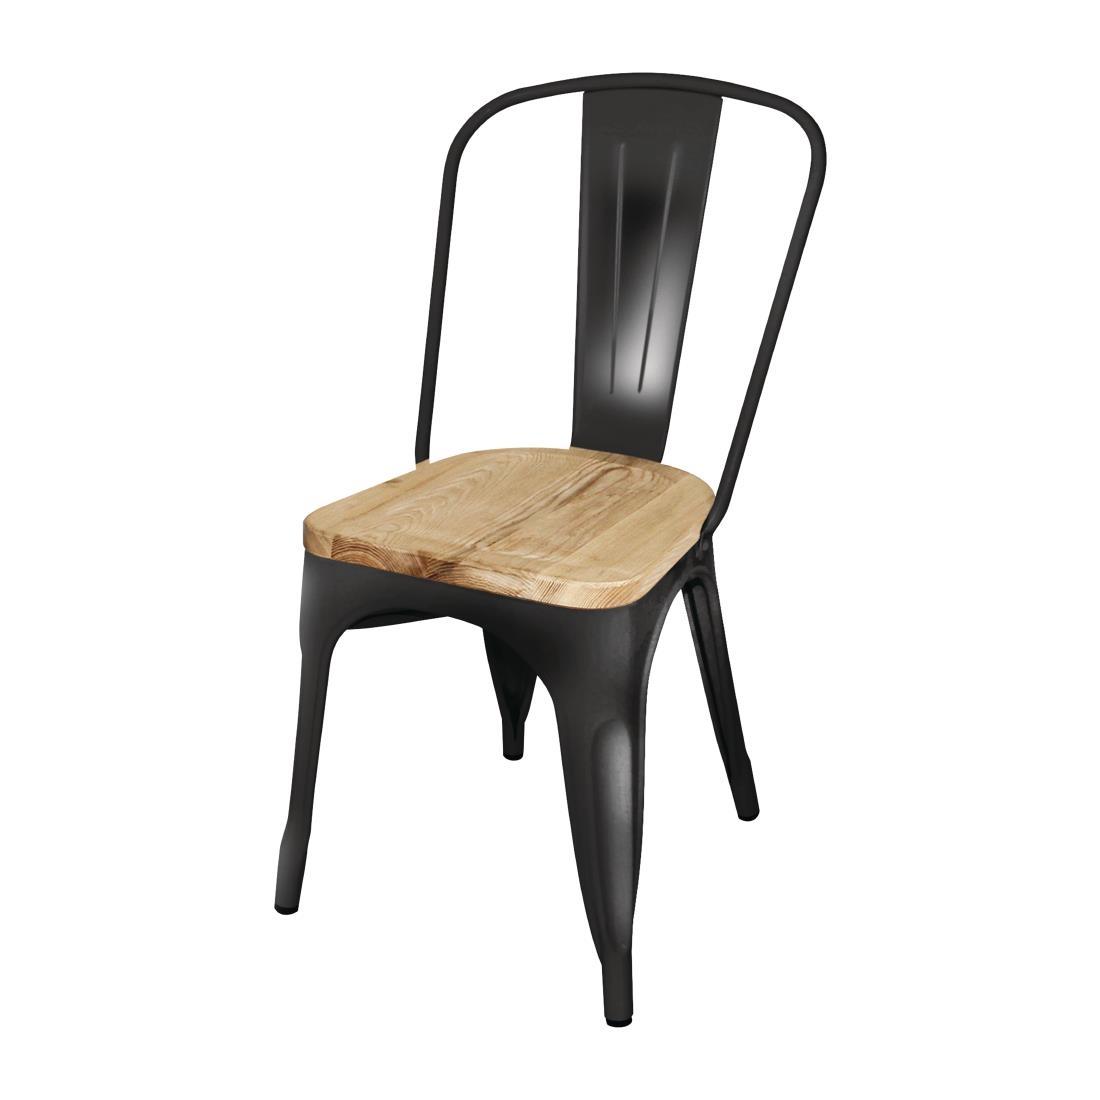 Bolero Bistro Side Chairs with Wooden Seat Pad Black (Pack of 4) - GG707  - 2